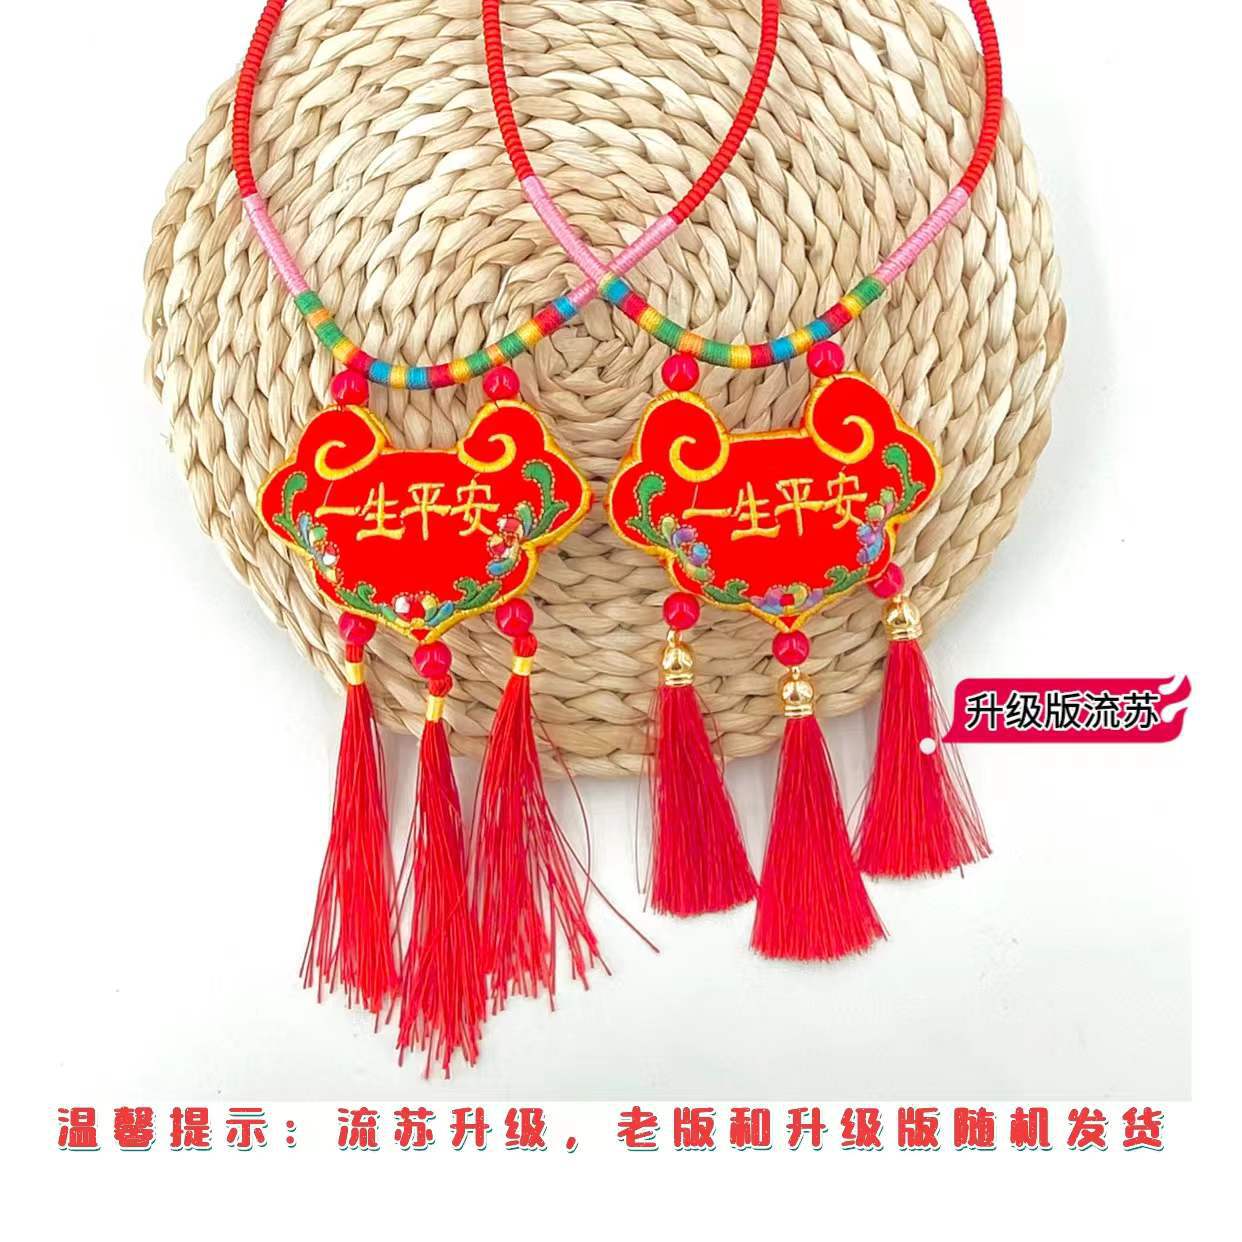 Collar Lock Baby Tang Costume Accessories Tiger Head Pig Head Dragon Boat Festival Sachet Sachet Longevity Safe Lock First Month Old 100 Days Old Years Old Men and Women